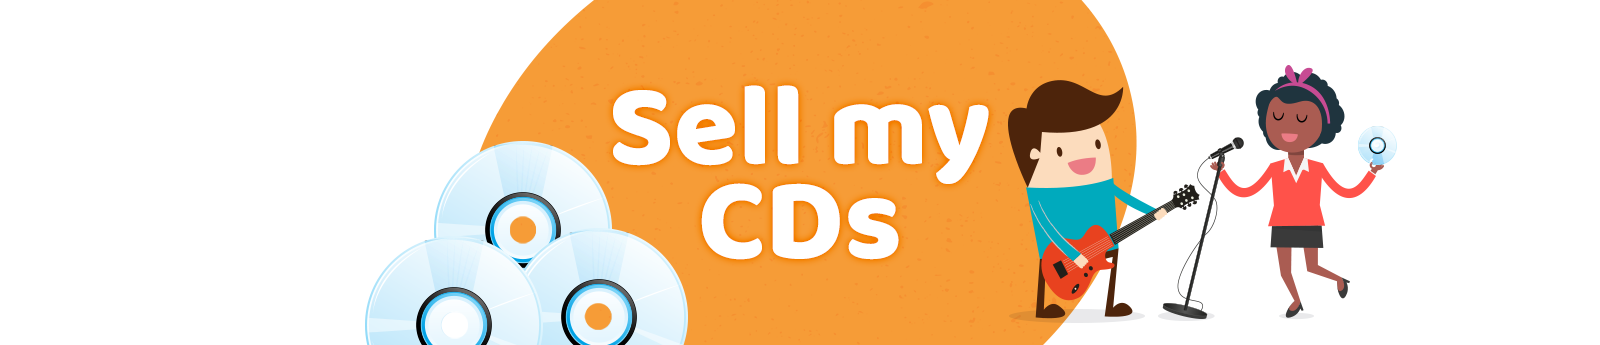 Sell CDs